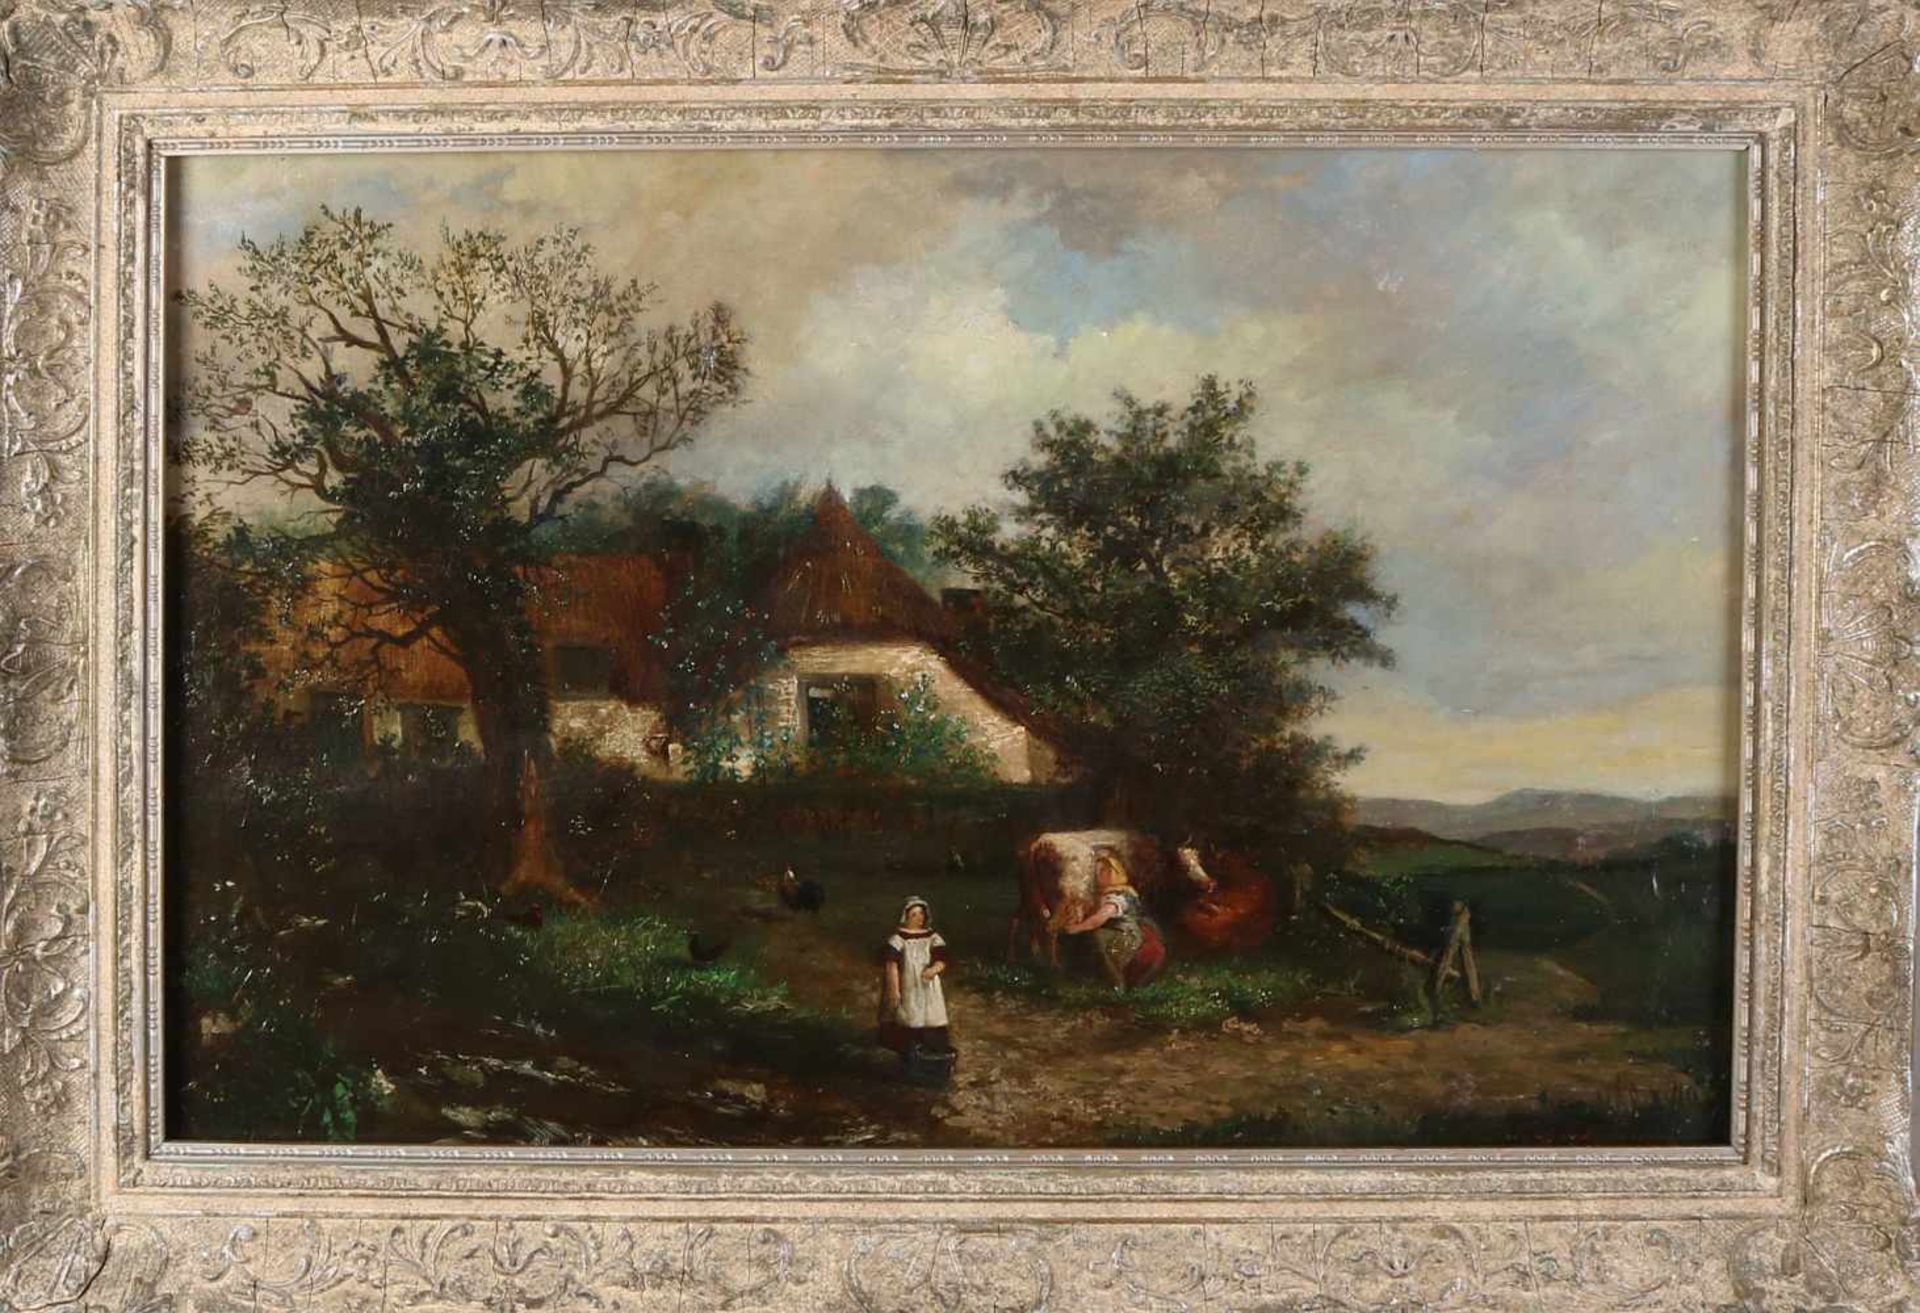 FA Philips. 1835 - 1903. Farm with cattle and figures. Oil on linen. Dimensions: 76 x 50 cm. In good